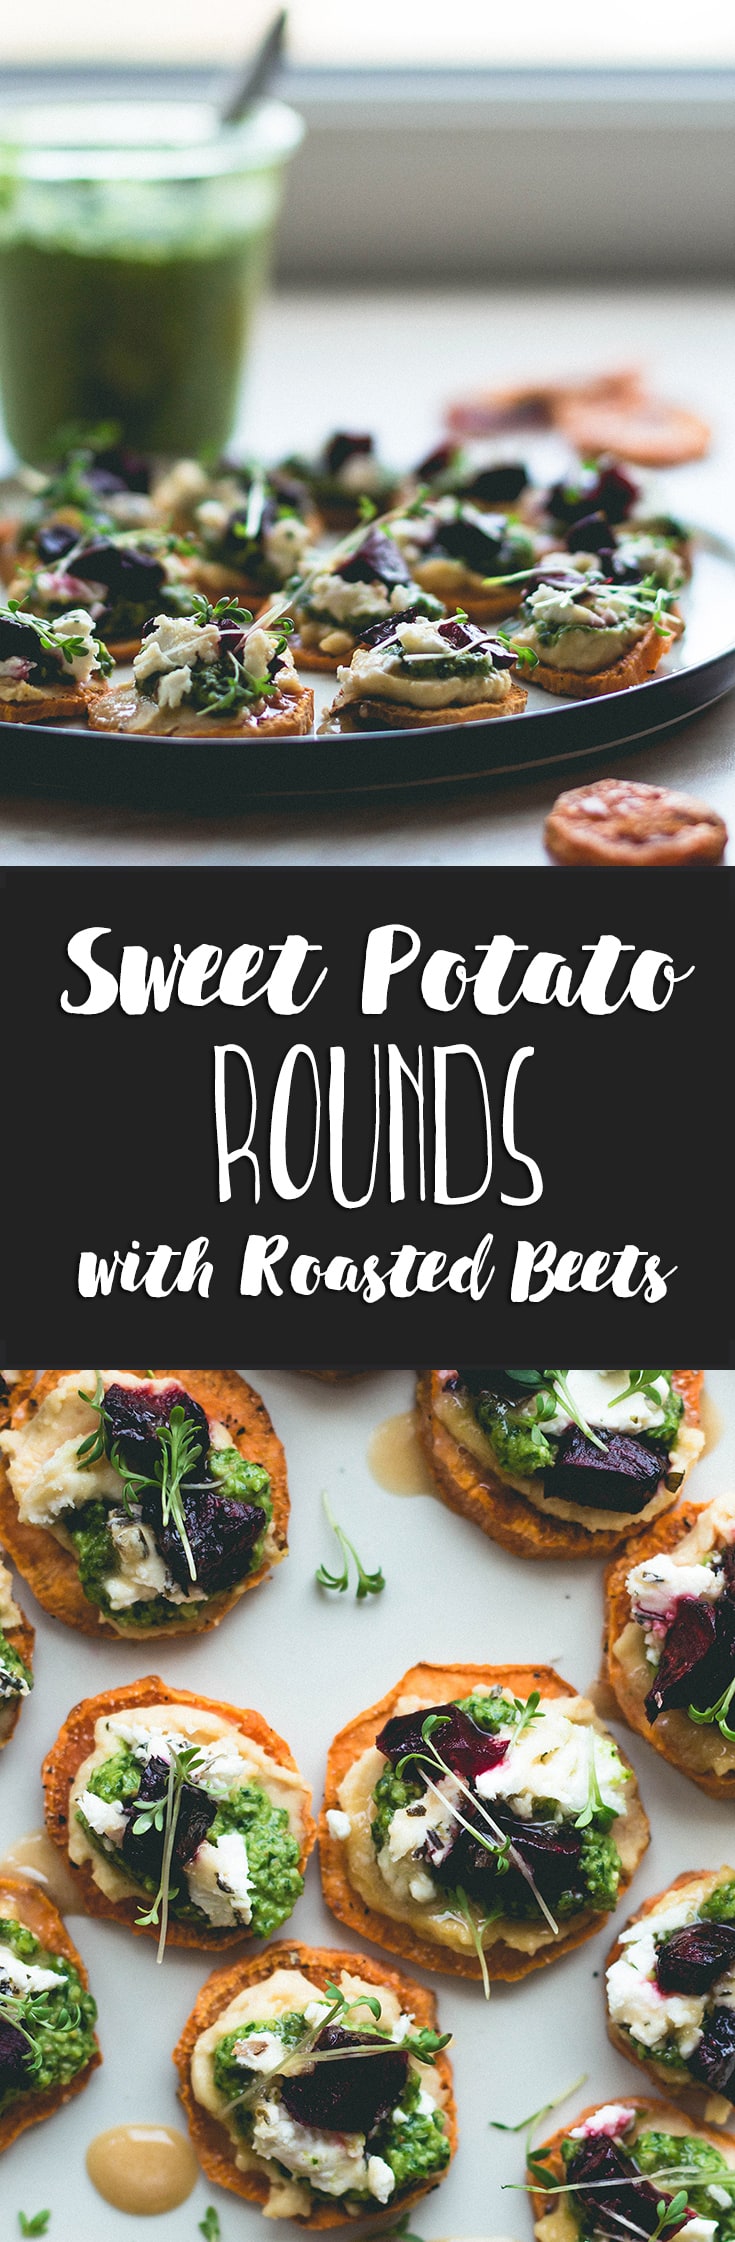 Sweet Potato Rounds with Hummus, Pesto, and Goat Cheese